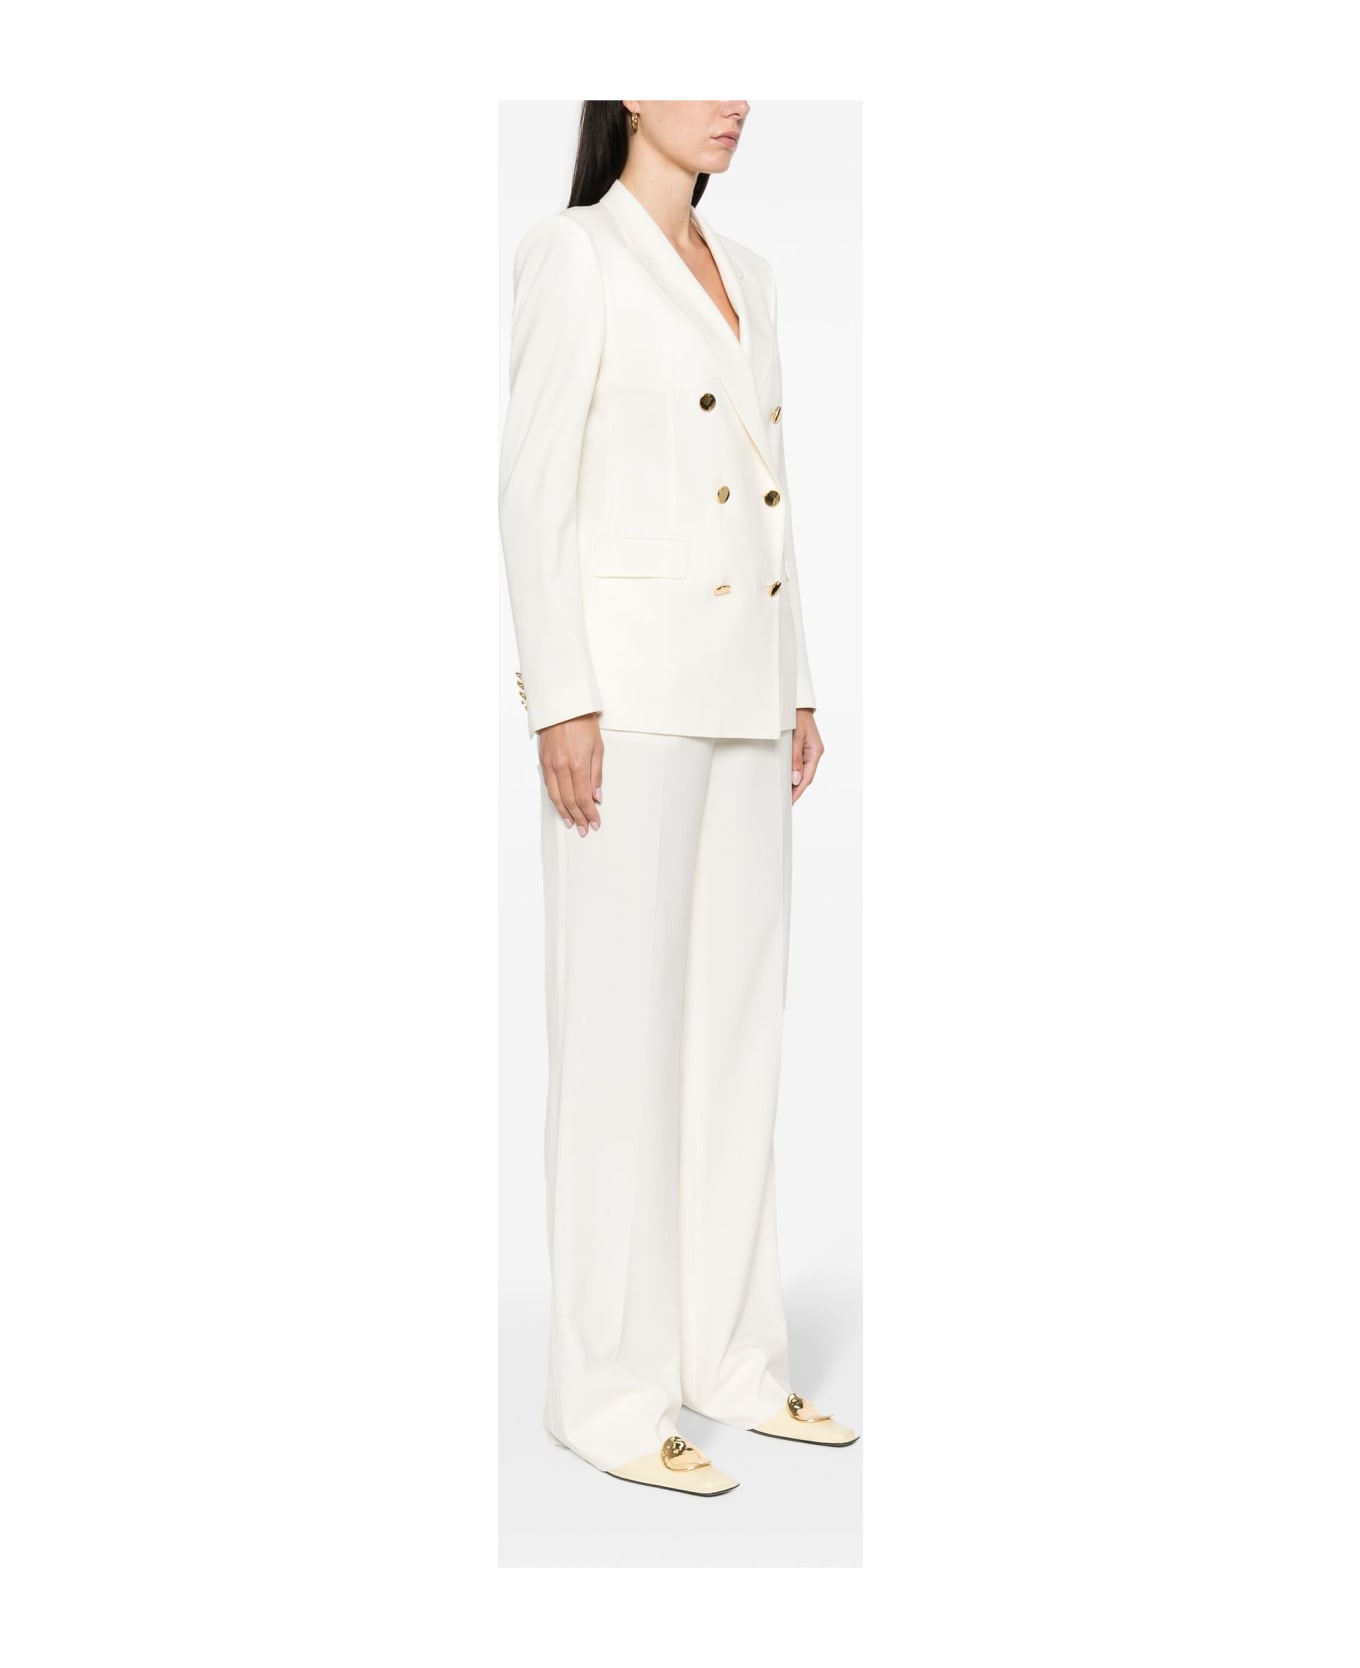 Tagliatore Ivory White Double-breasted Suit - White